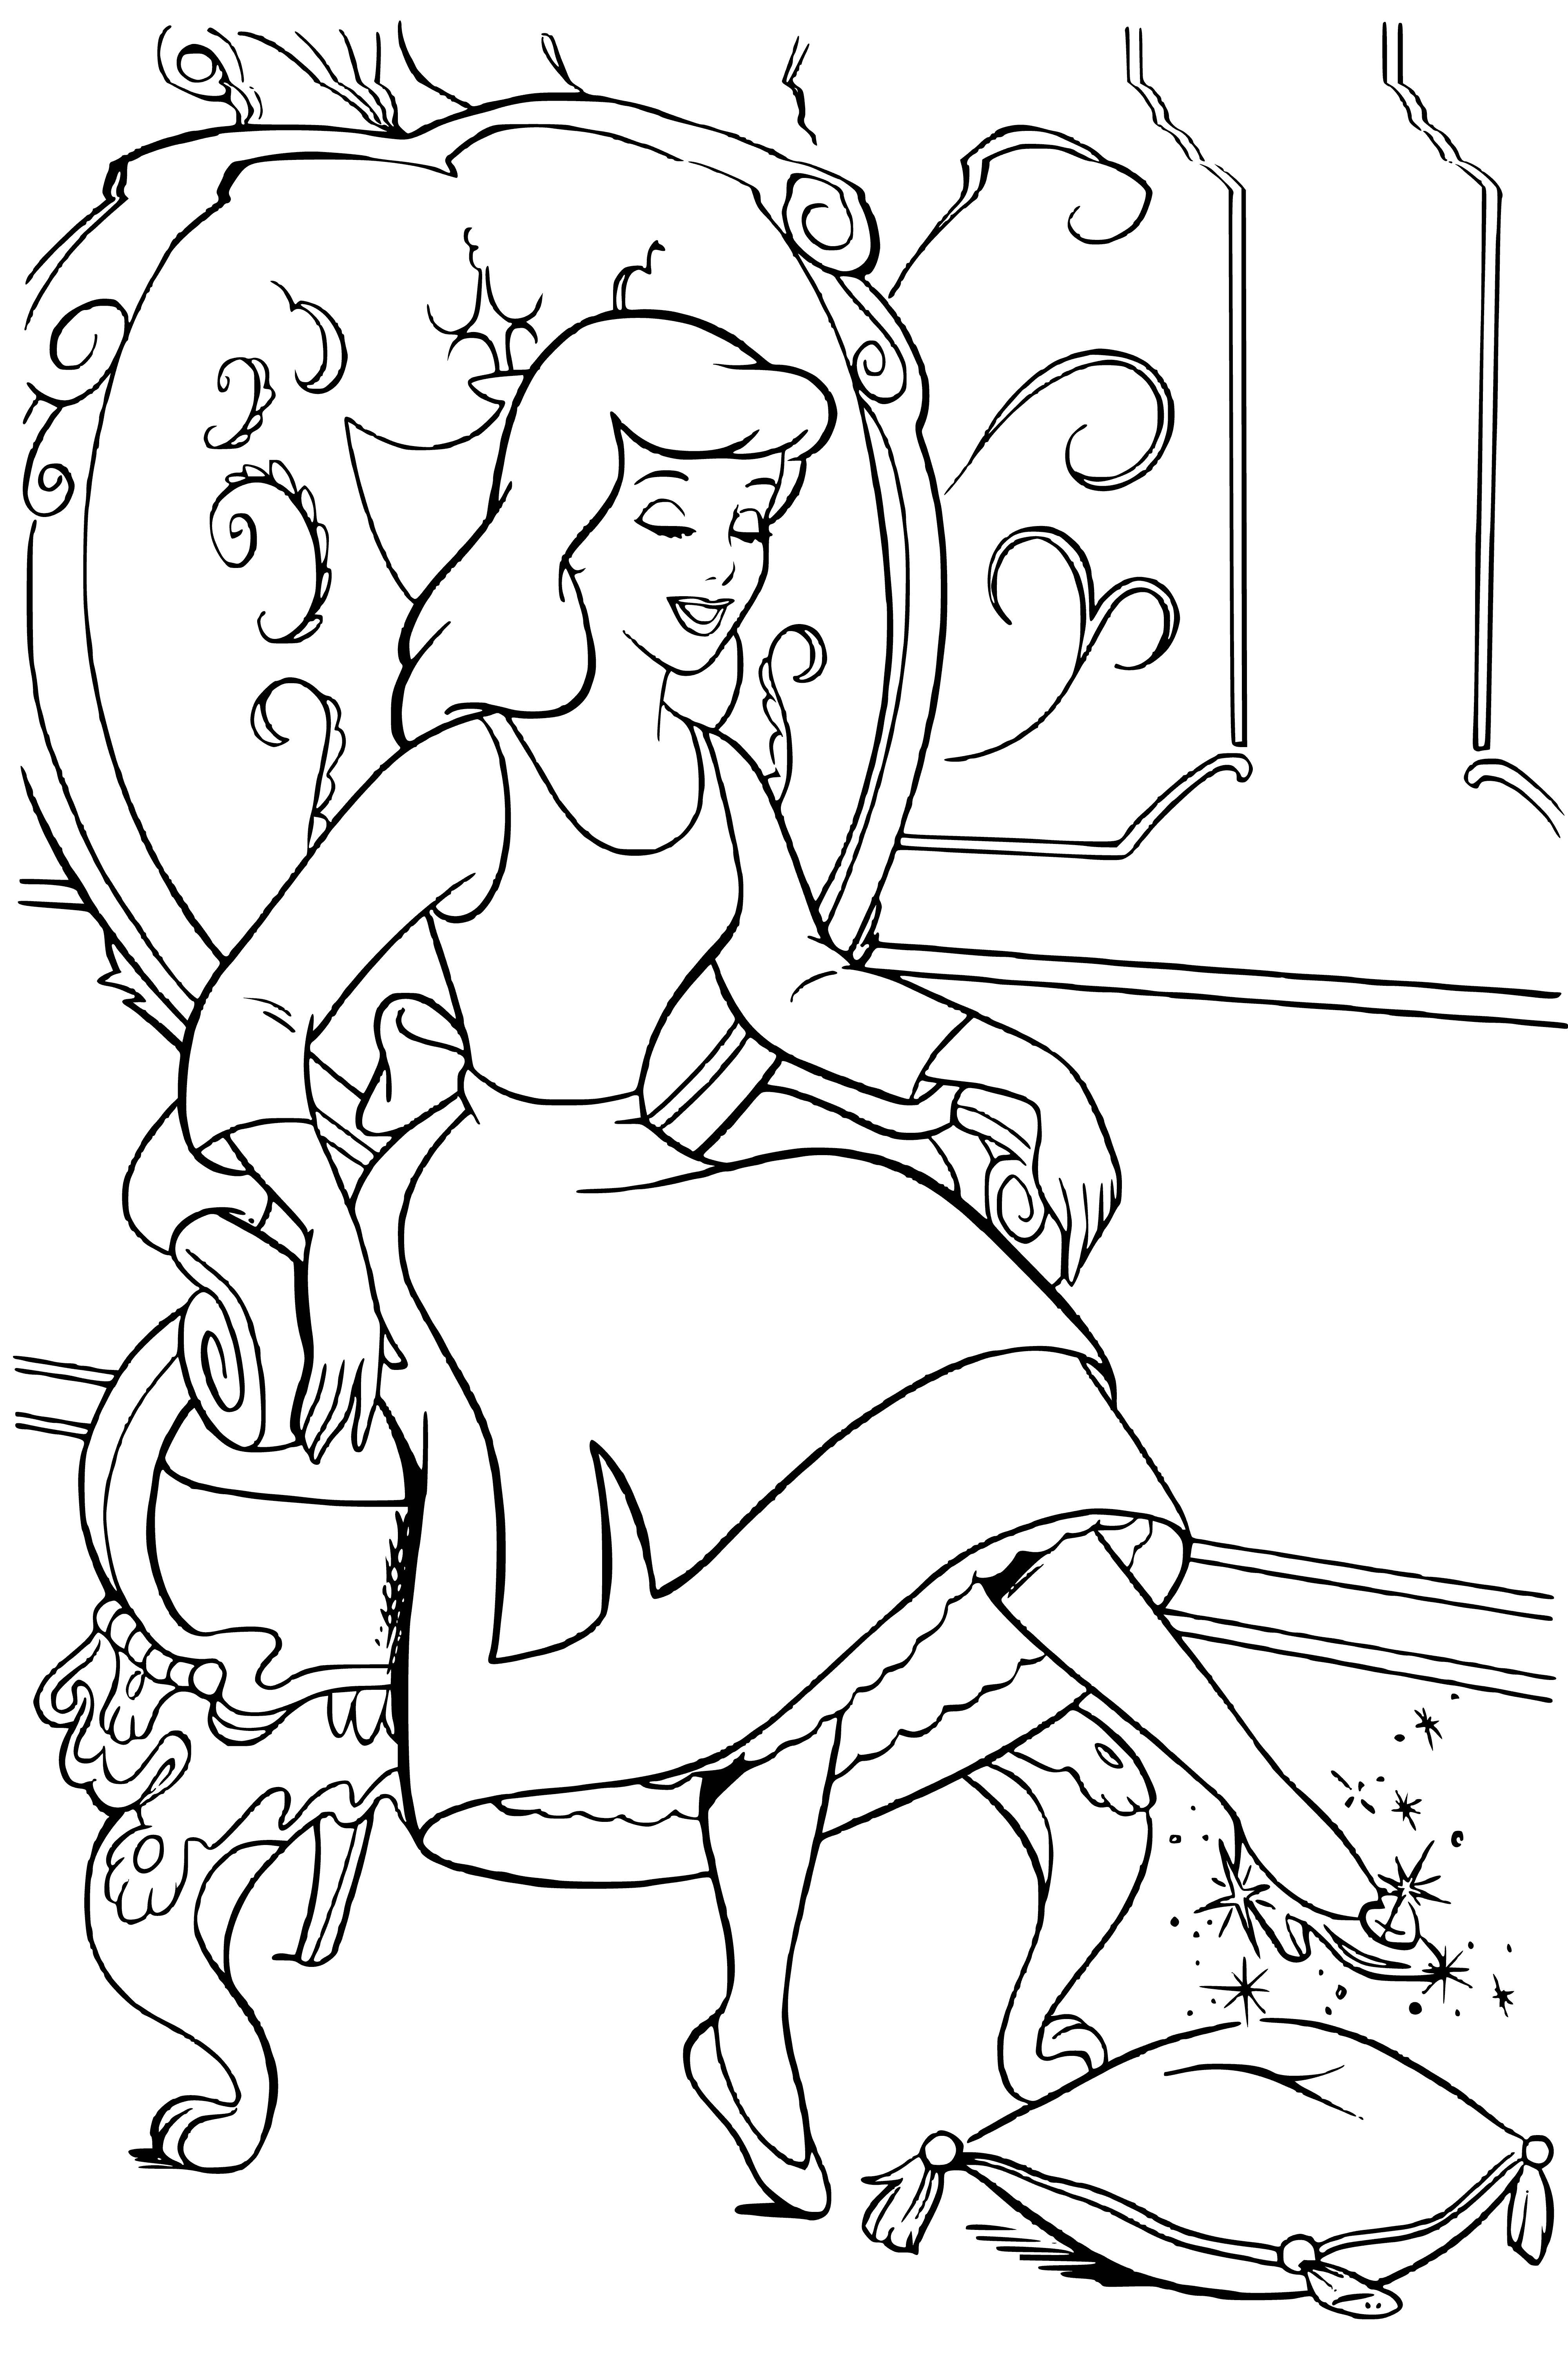 Time slipper coloring page